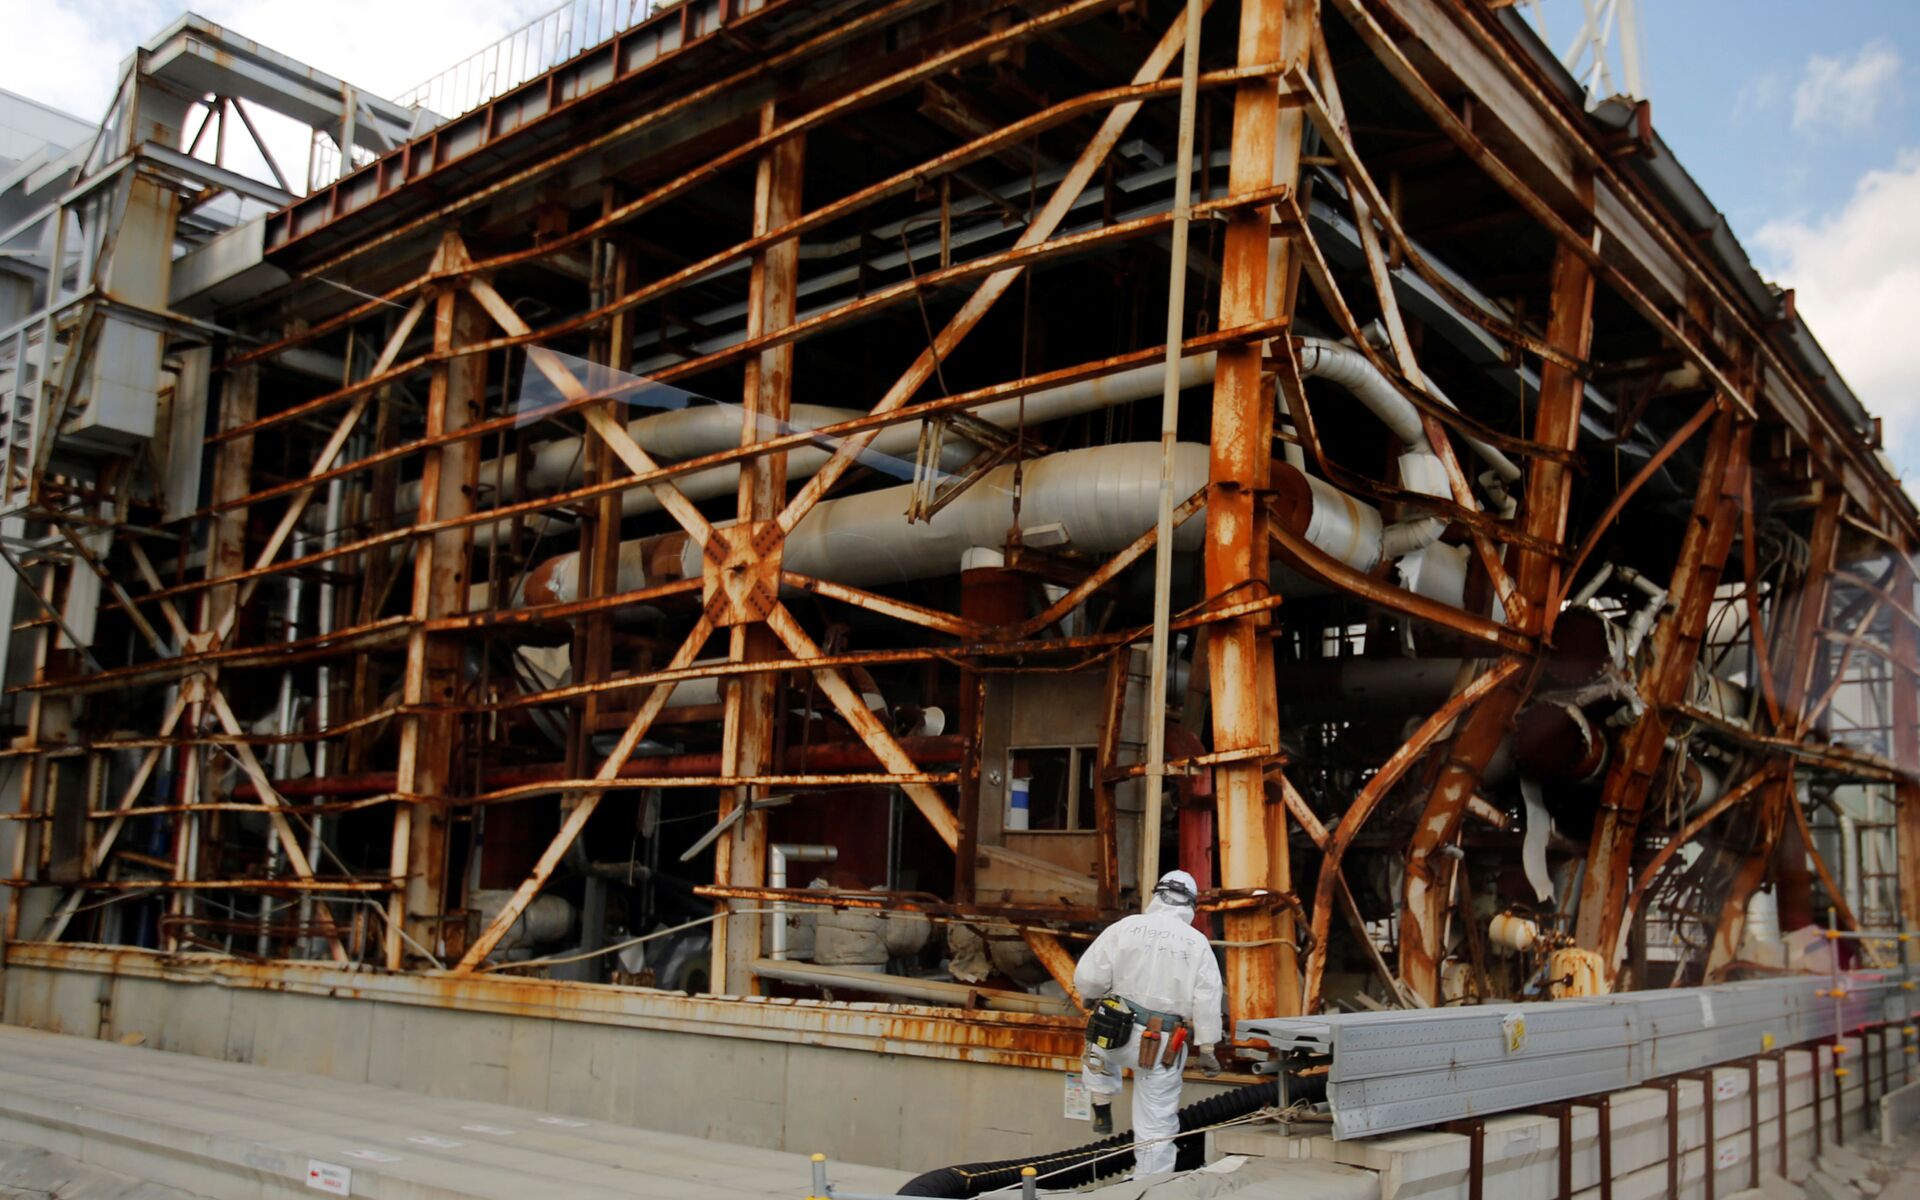 Ten Years After Freak Tsunami Caused Fukushima Disaster, Why Is Japan Sticking With Nuclear Energy?  - Sputnik International, 1920, 11.03.2021